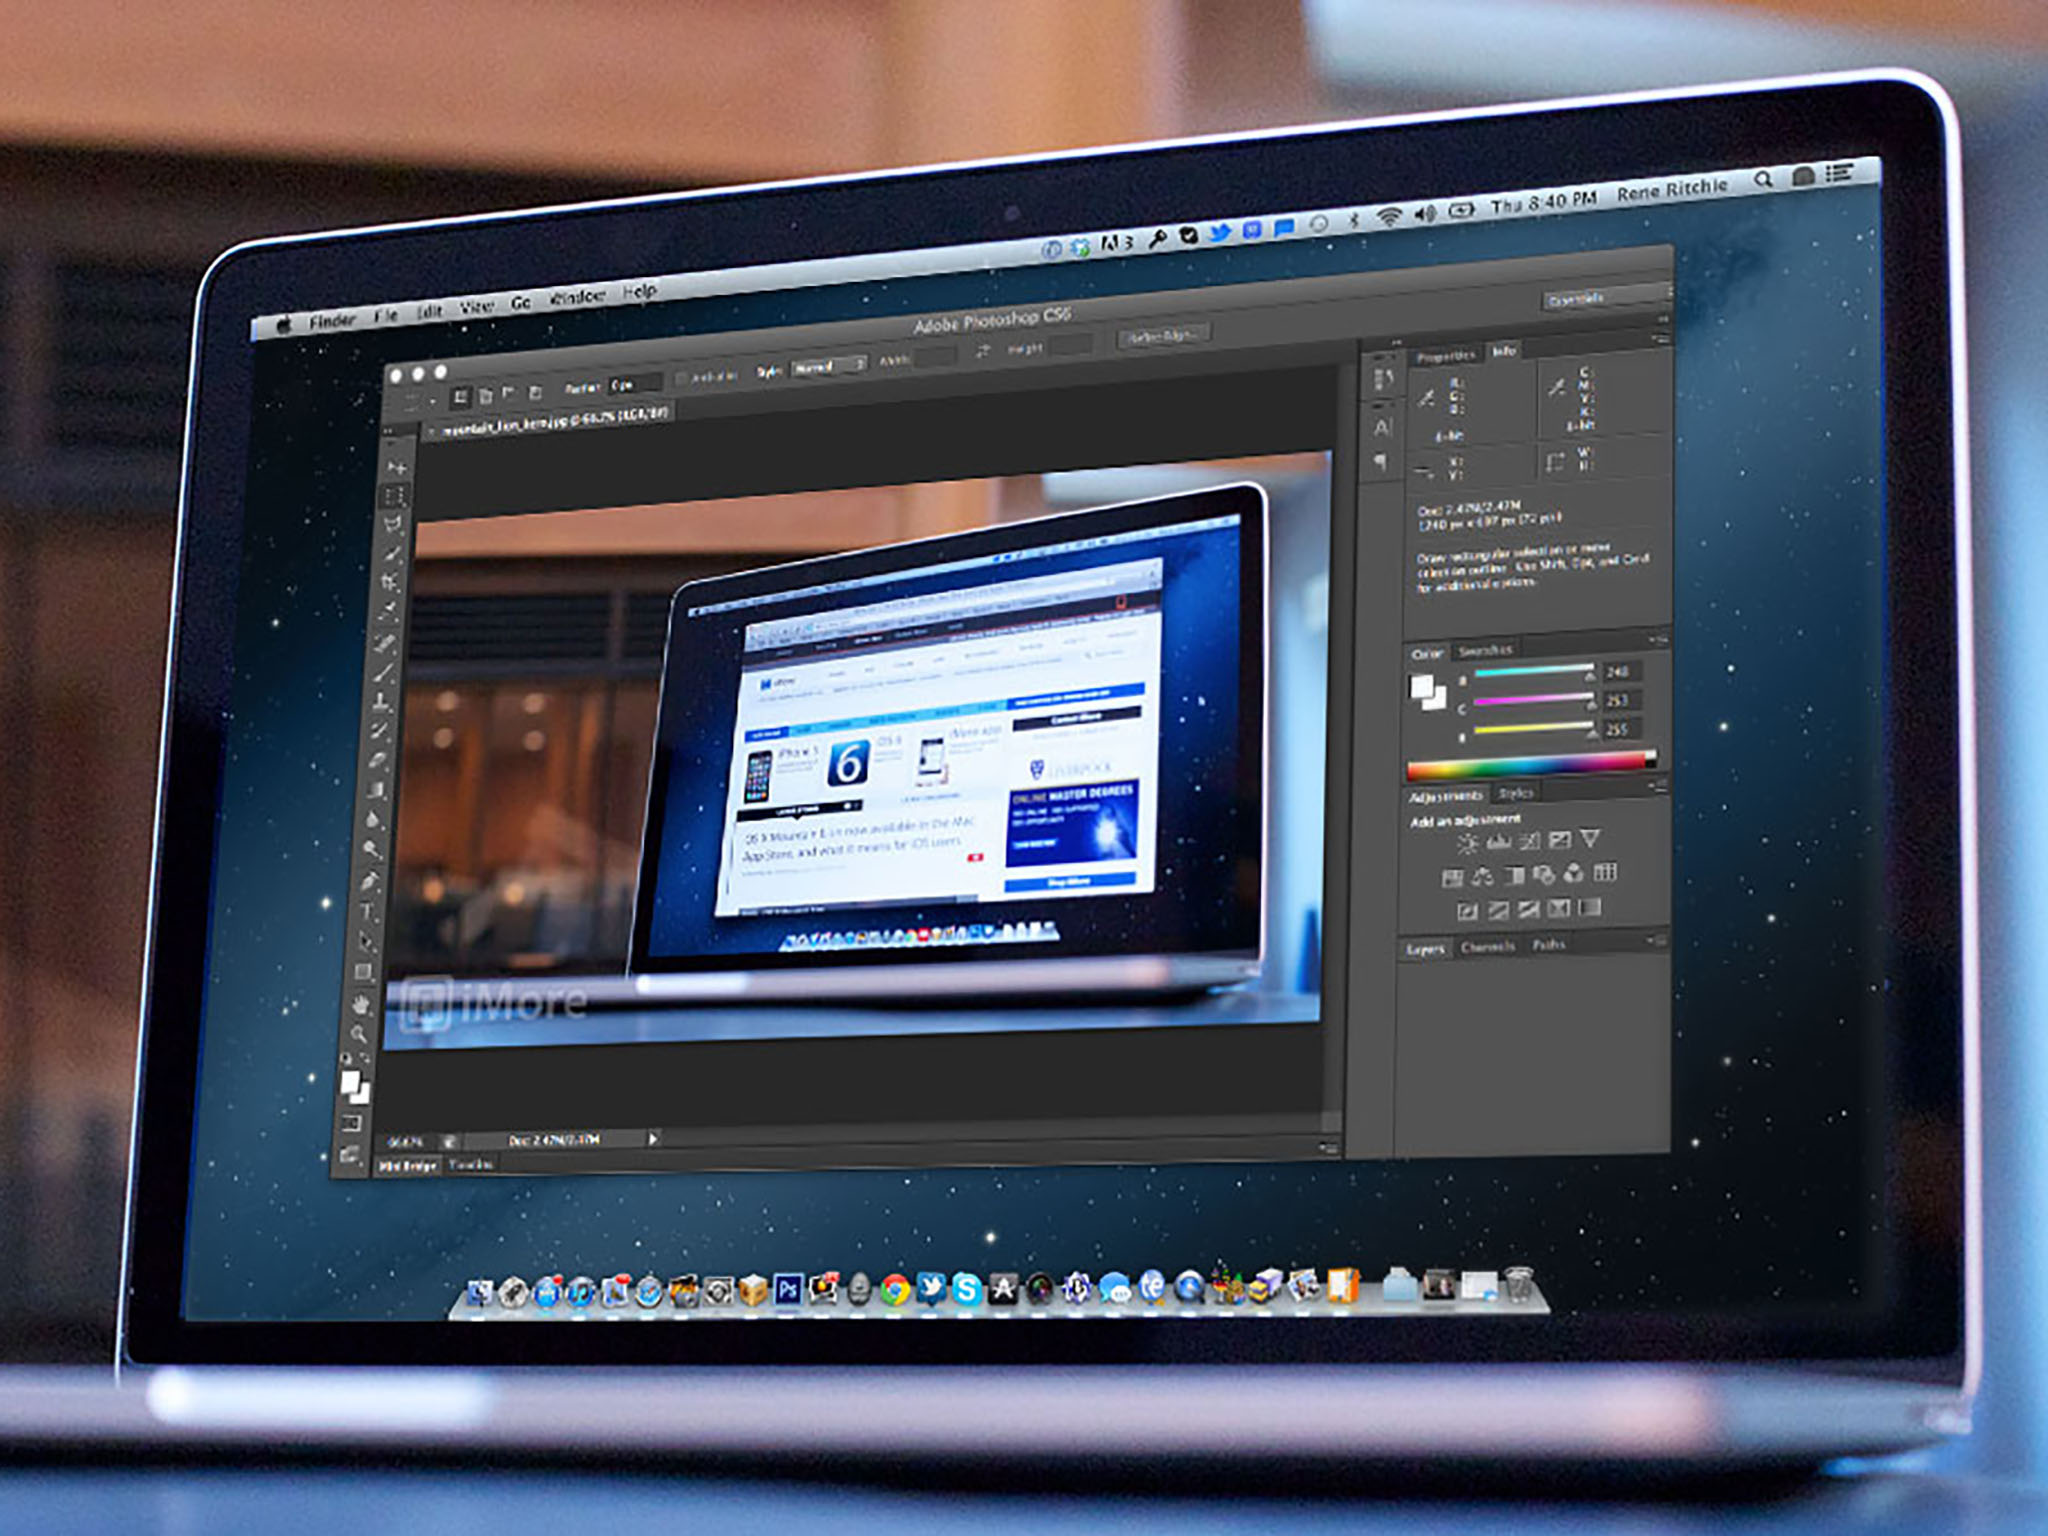 Adobe Photoshop Elements 13 and Premiere Elements 13 released for Mac